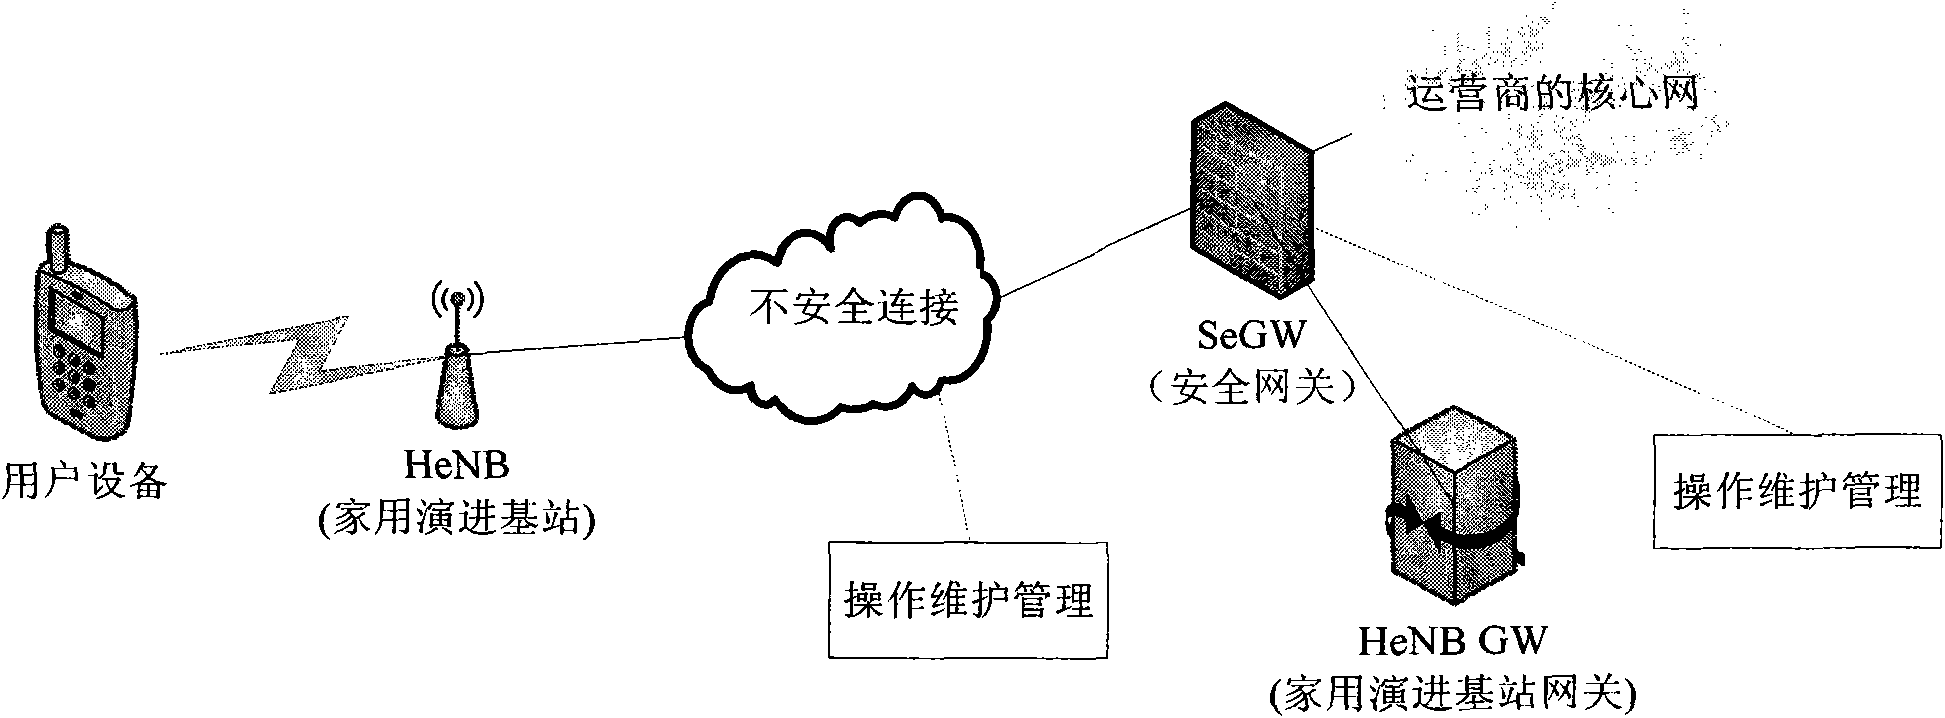 System and method for determining IP address of network equipment using network address translation